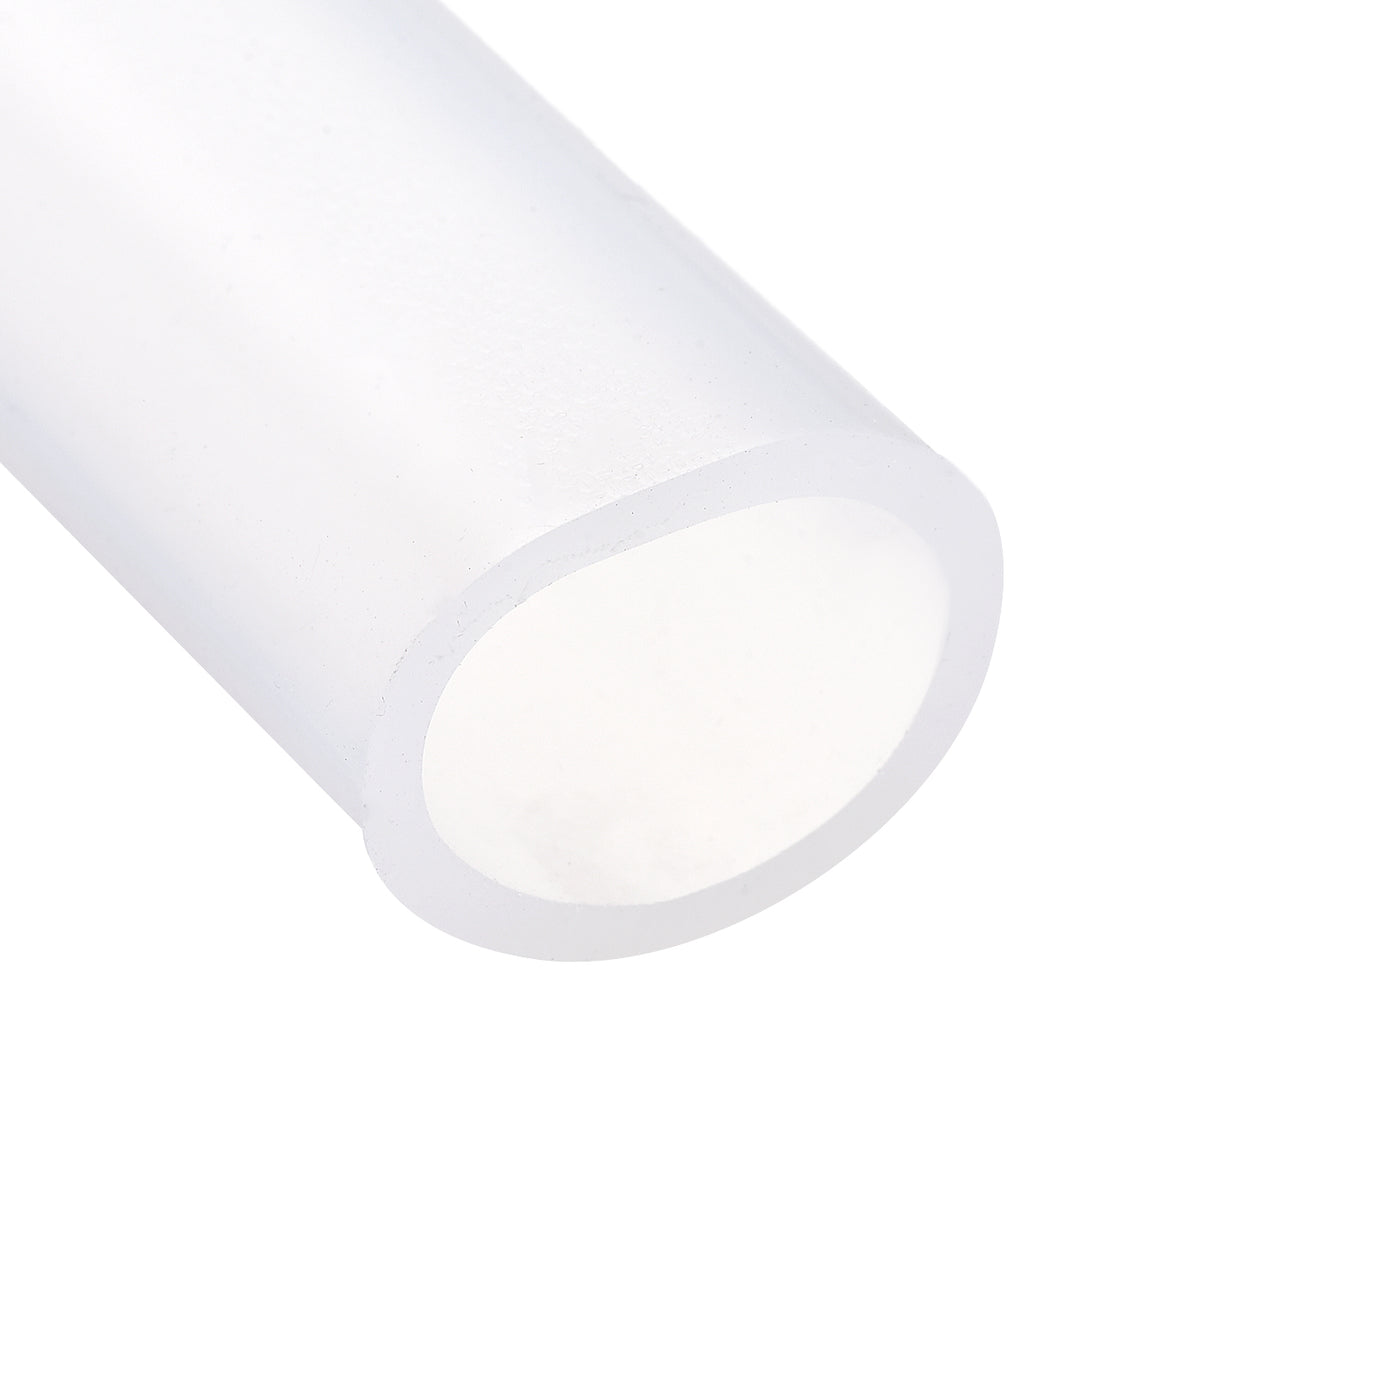 uxcell Uxcell Silicone Tubing 5/8" ID, 53/64" OD 1Pcs 0.33 Ft for Pump Transfer, Transparent